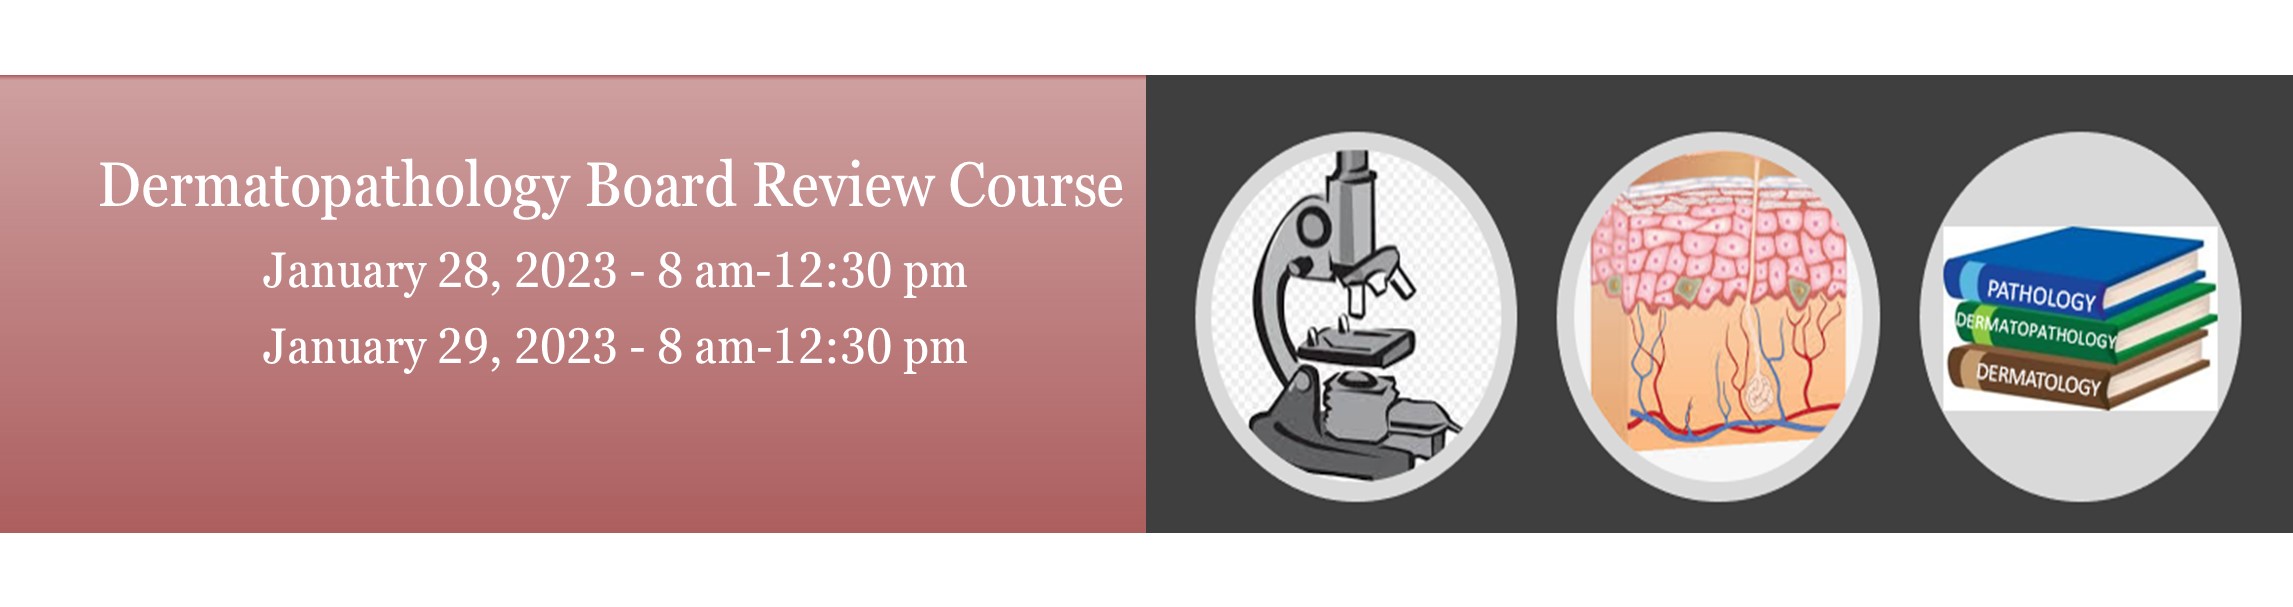 Dermatopathology Board Review Course Banner